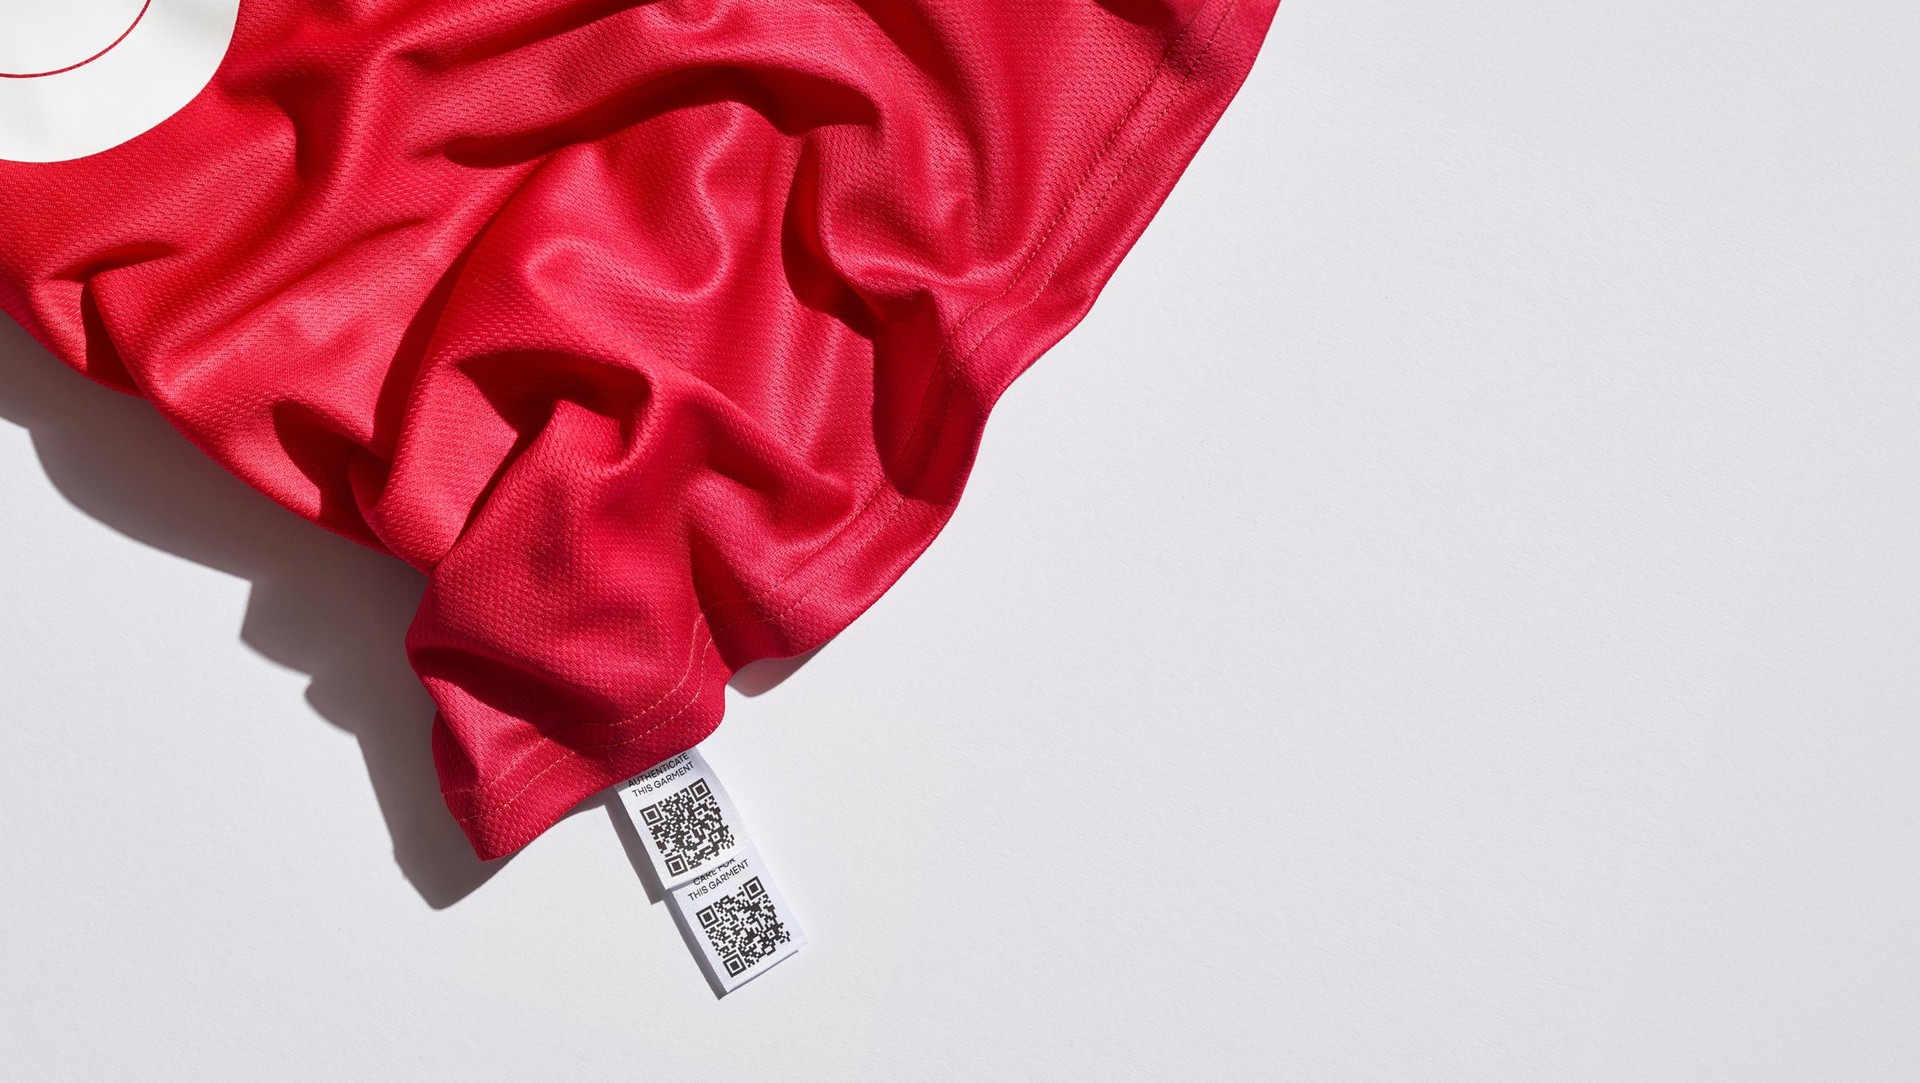 Connected jersey with layered interior labels with QR codes